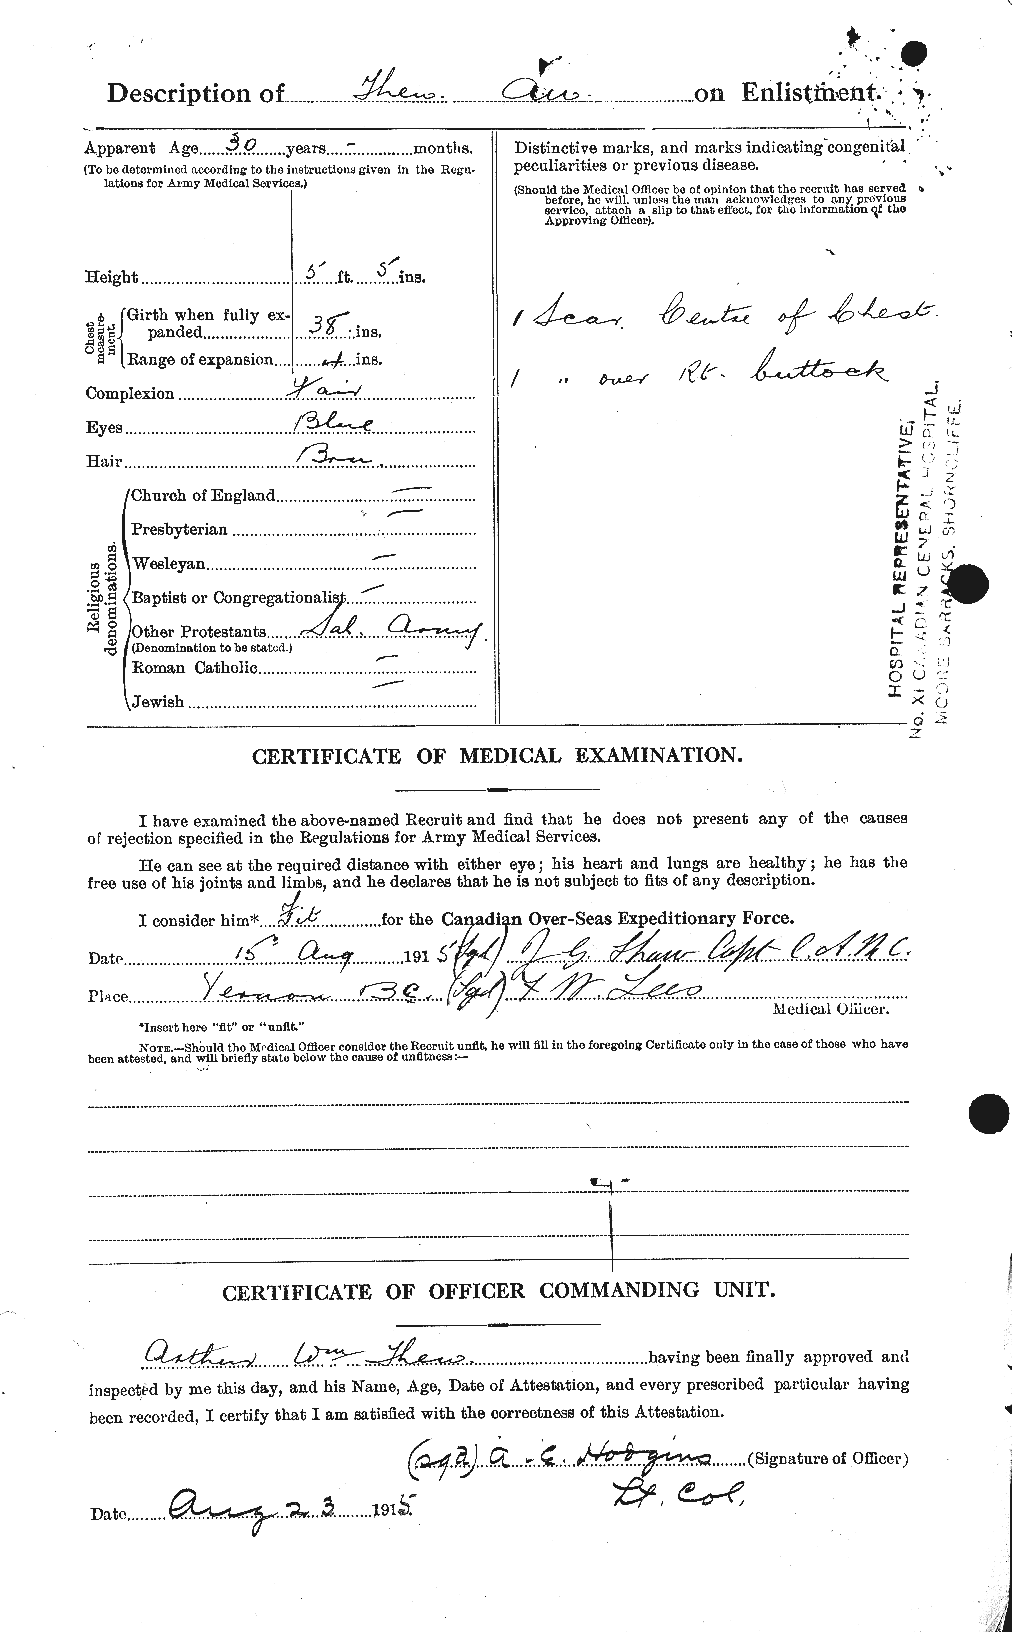 Personnel Records of the First World War - CEF 630007b